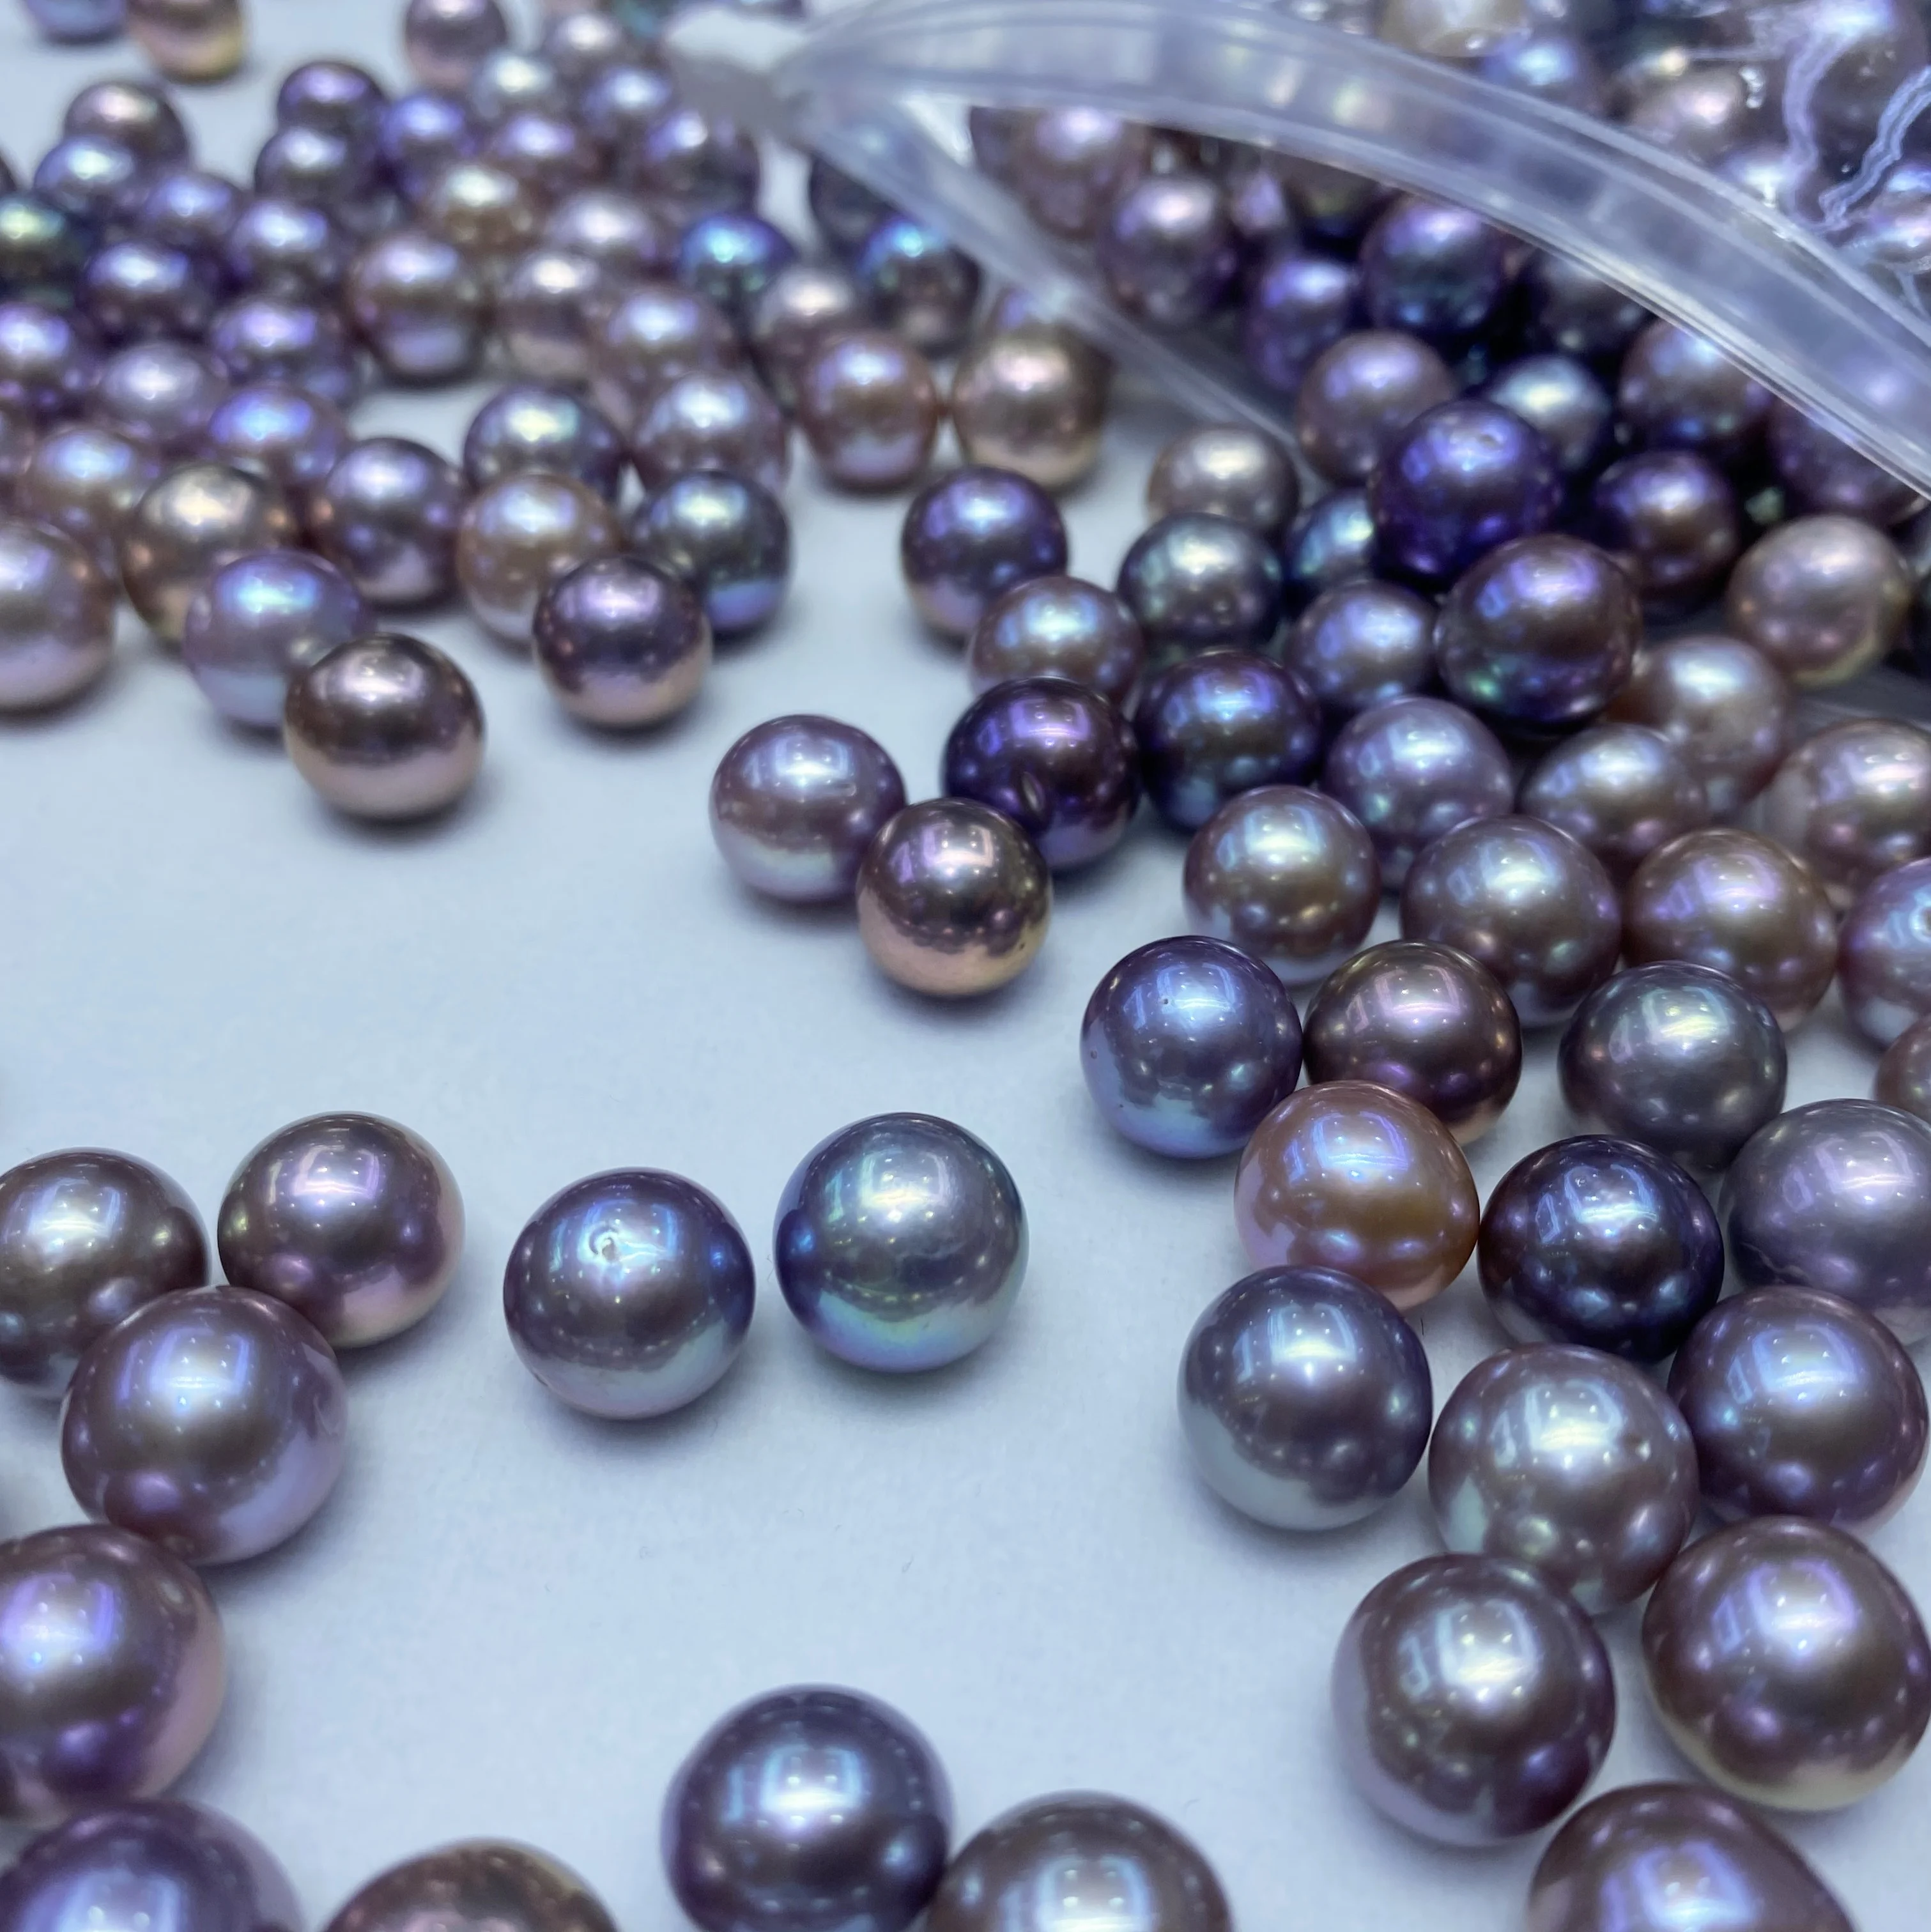 Edison Loose Pearl 10-13mm Large Aaaa Grade Natural Color Freshwater ...